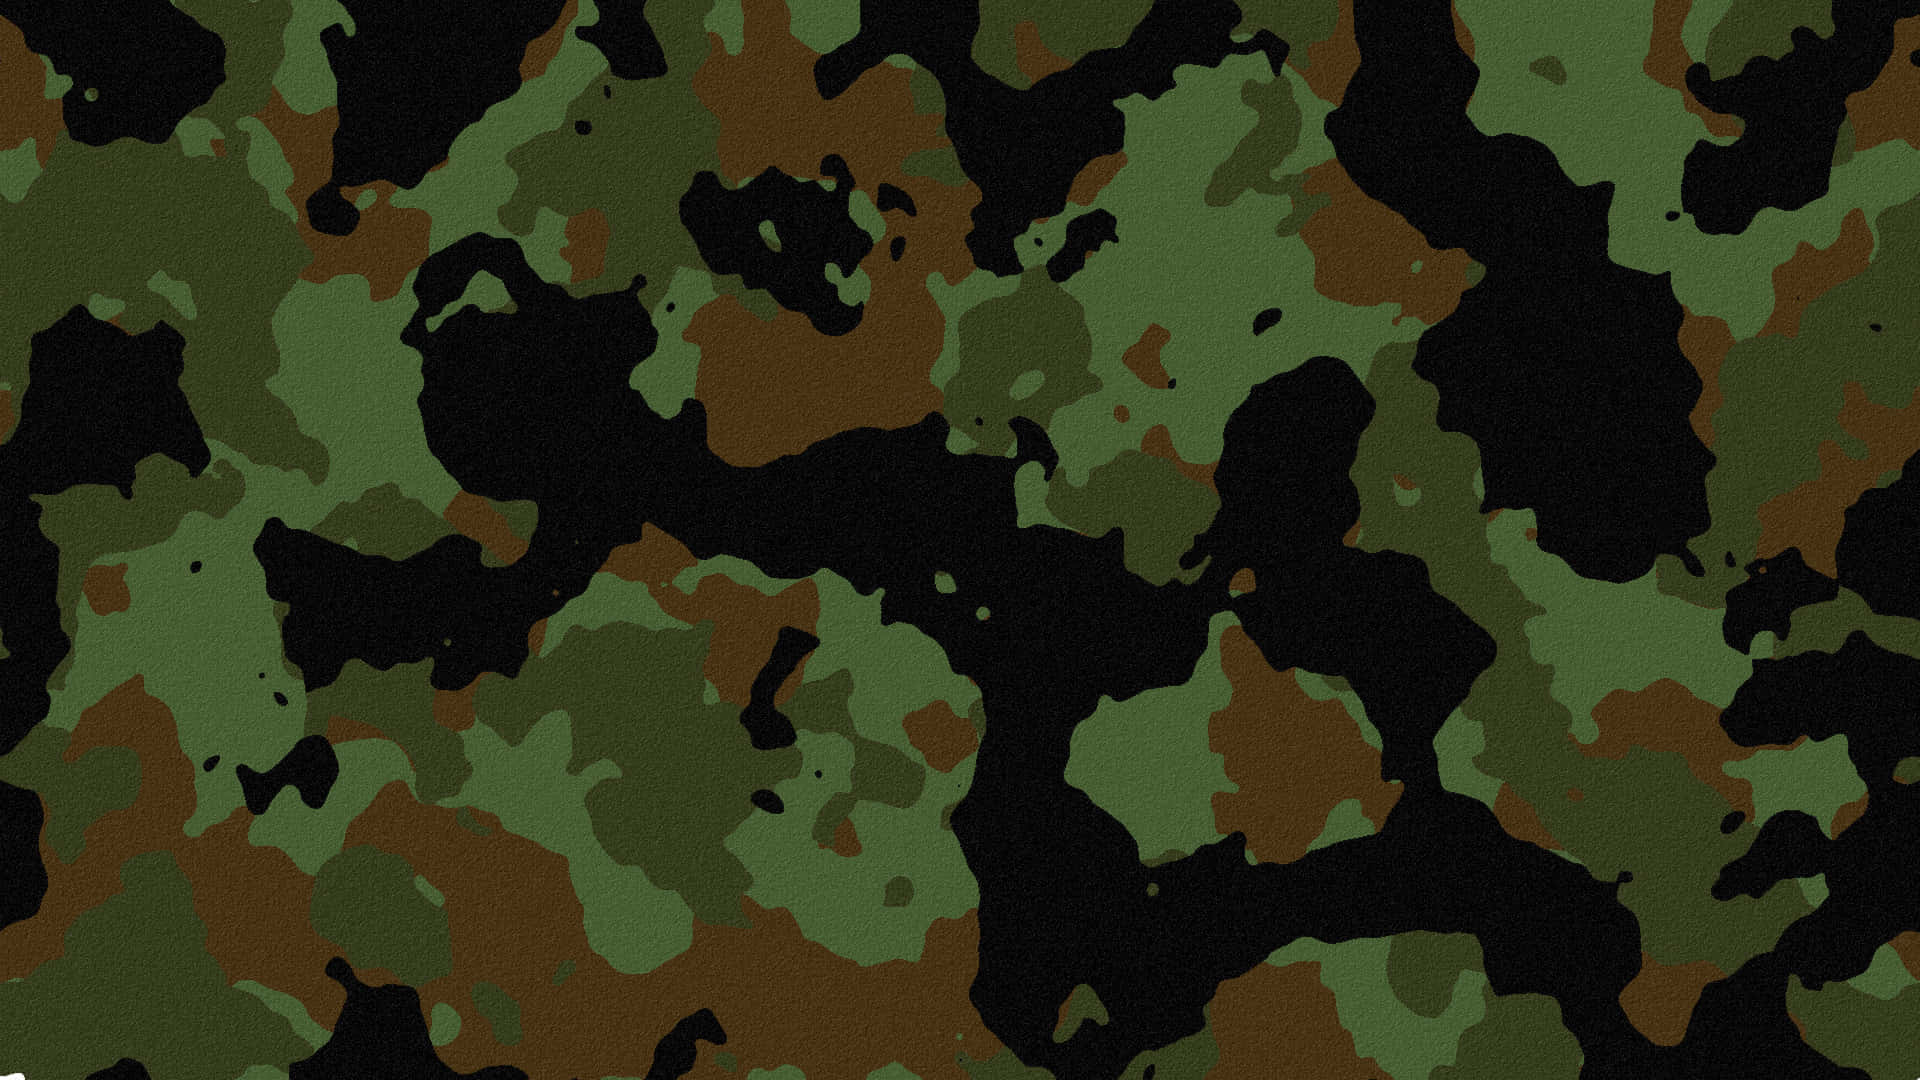 Go hunting in style – Joining the trend with Green Camo Wallpaper